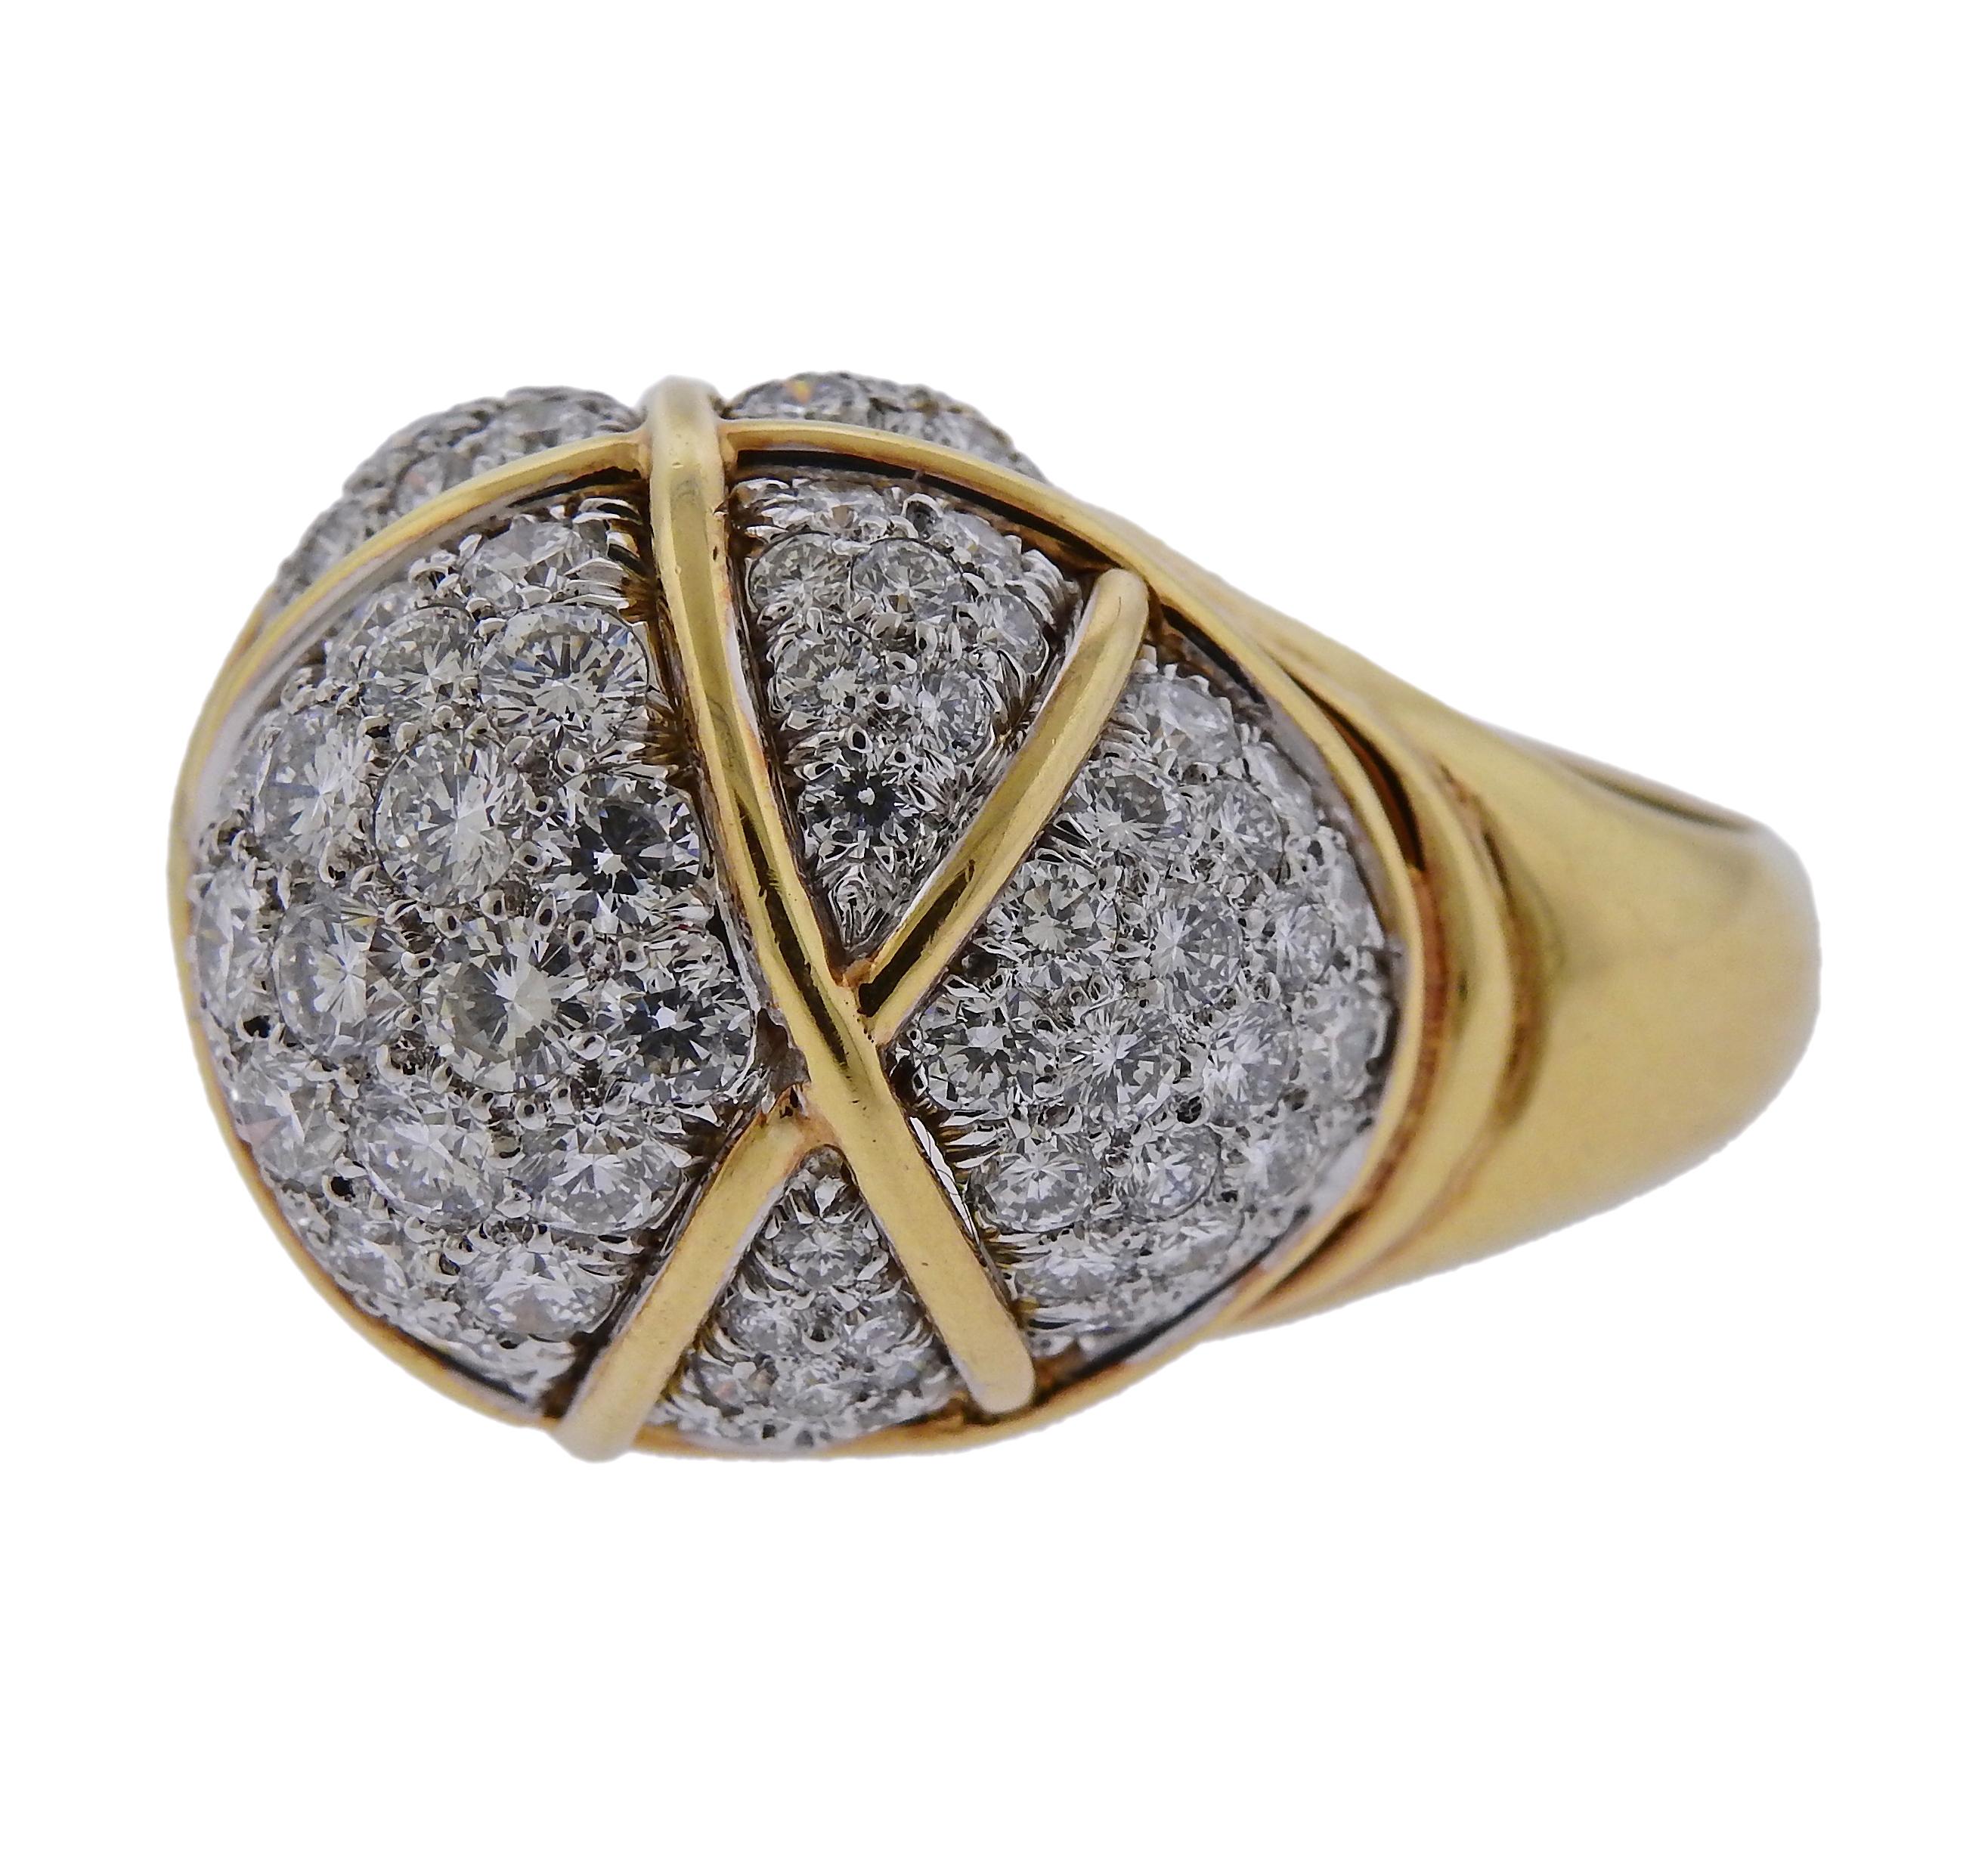 Impressive 18k gold and platinum cocktail ring, crafted by David Webb, set with approx. 4.00ctw in VS/H diamonds.  Ring size 8.5; Top of the ring measures 20mm x 25mm, sits approx. 18mmfrom the top of the finger. Marked: David Webb, 18k,900pt, DC 8.